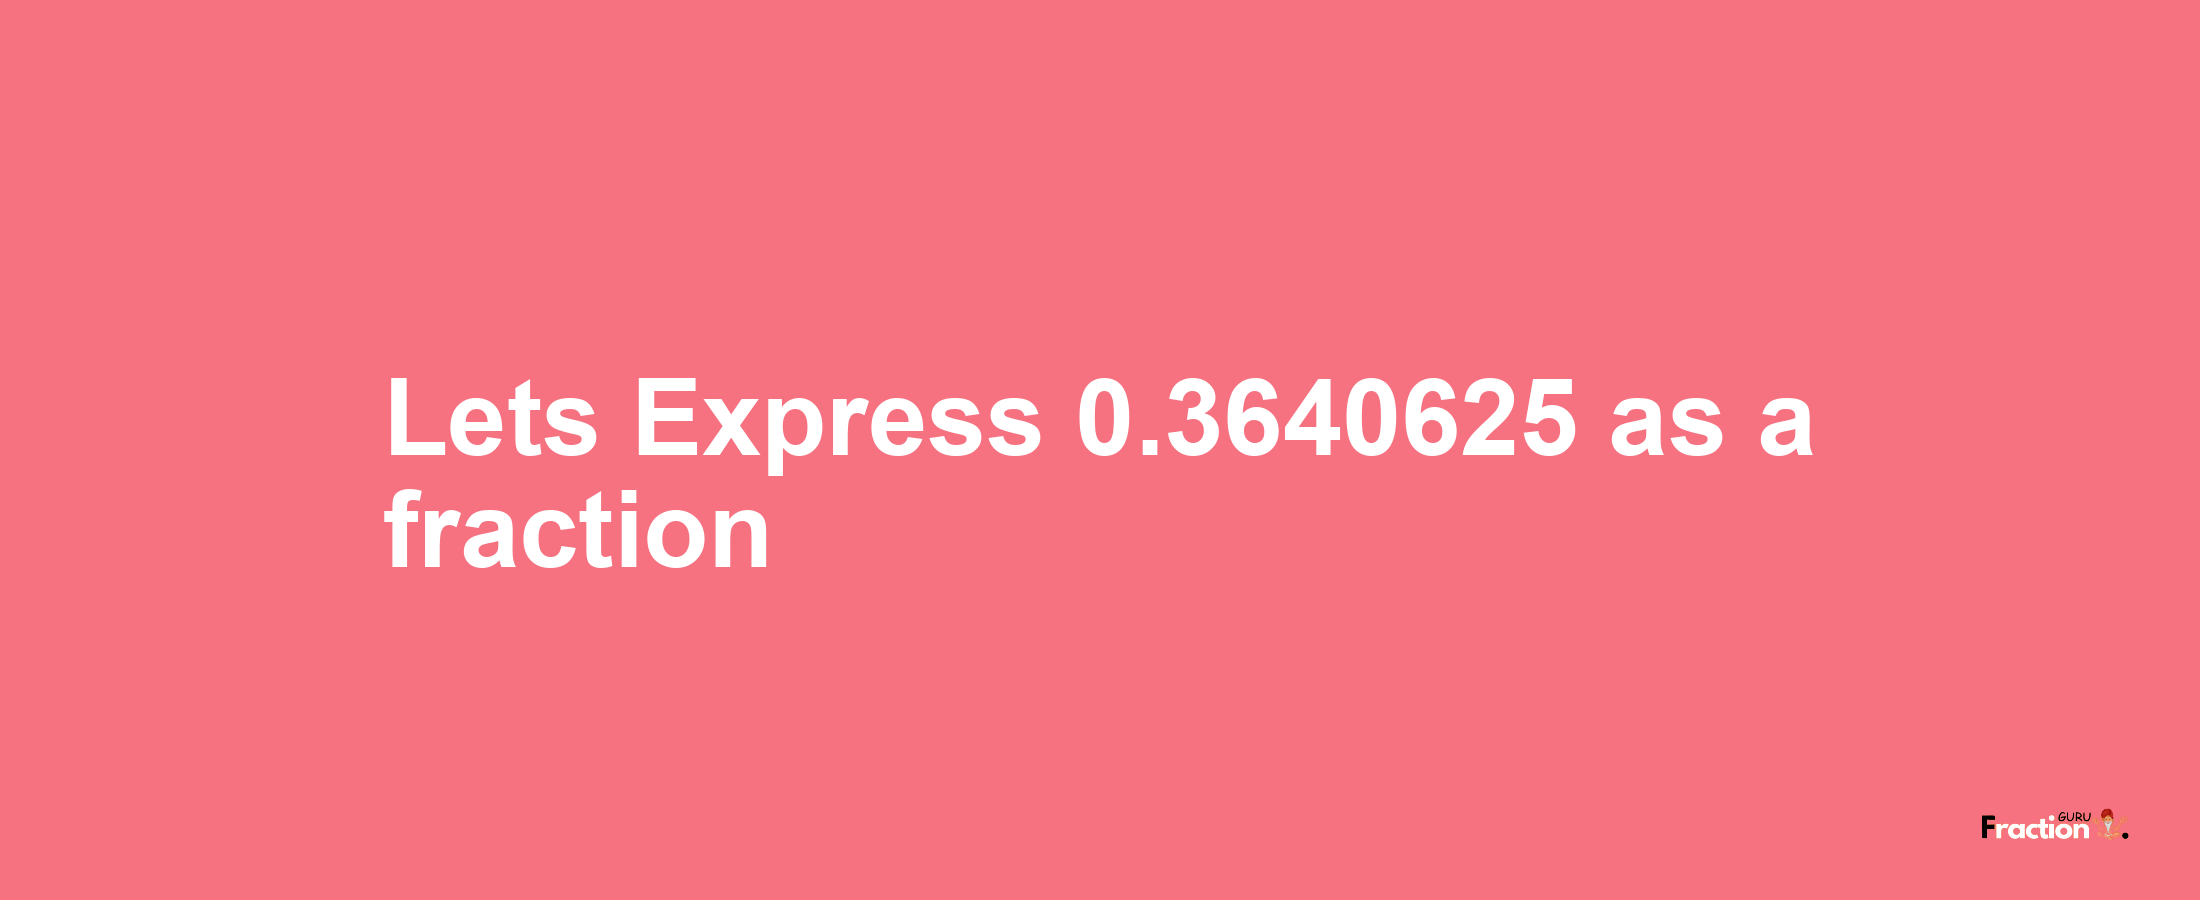 Lets Express 0.3640625 as afraction